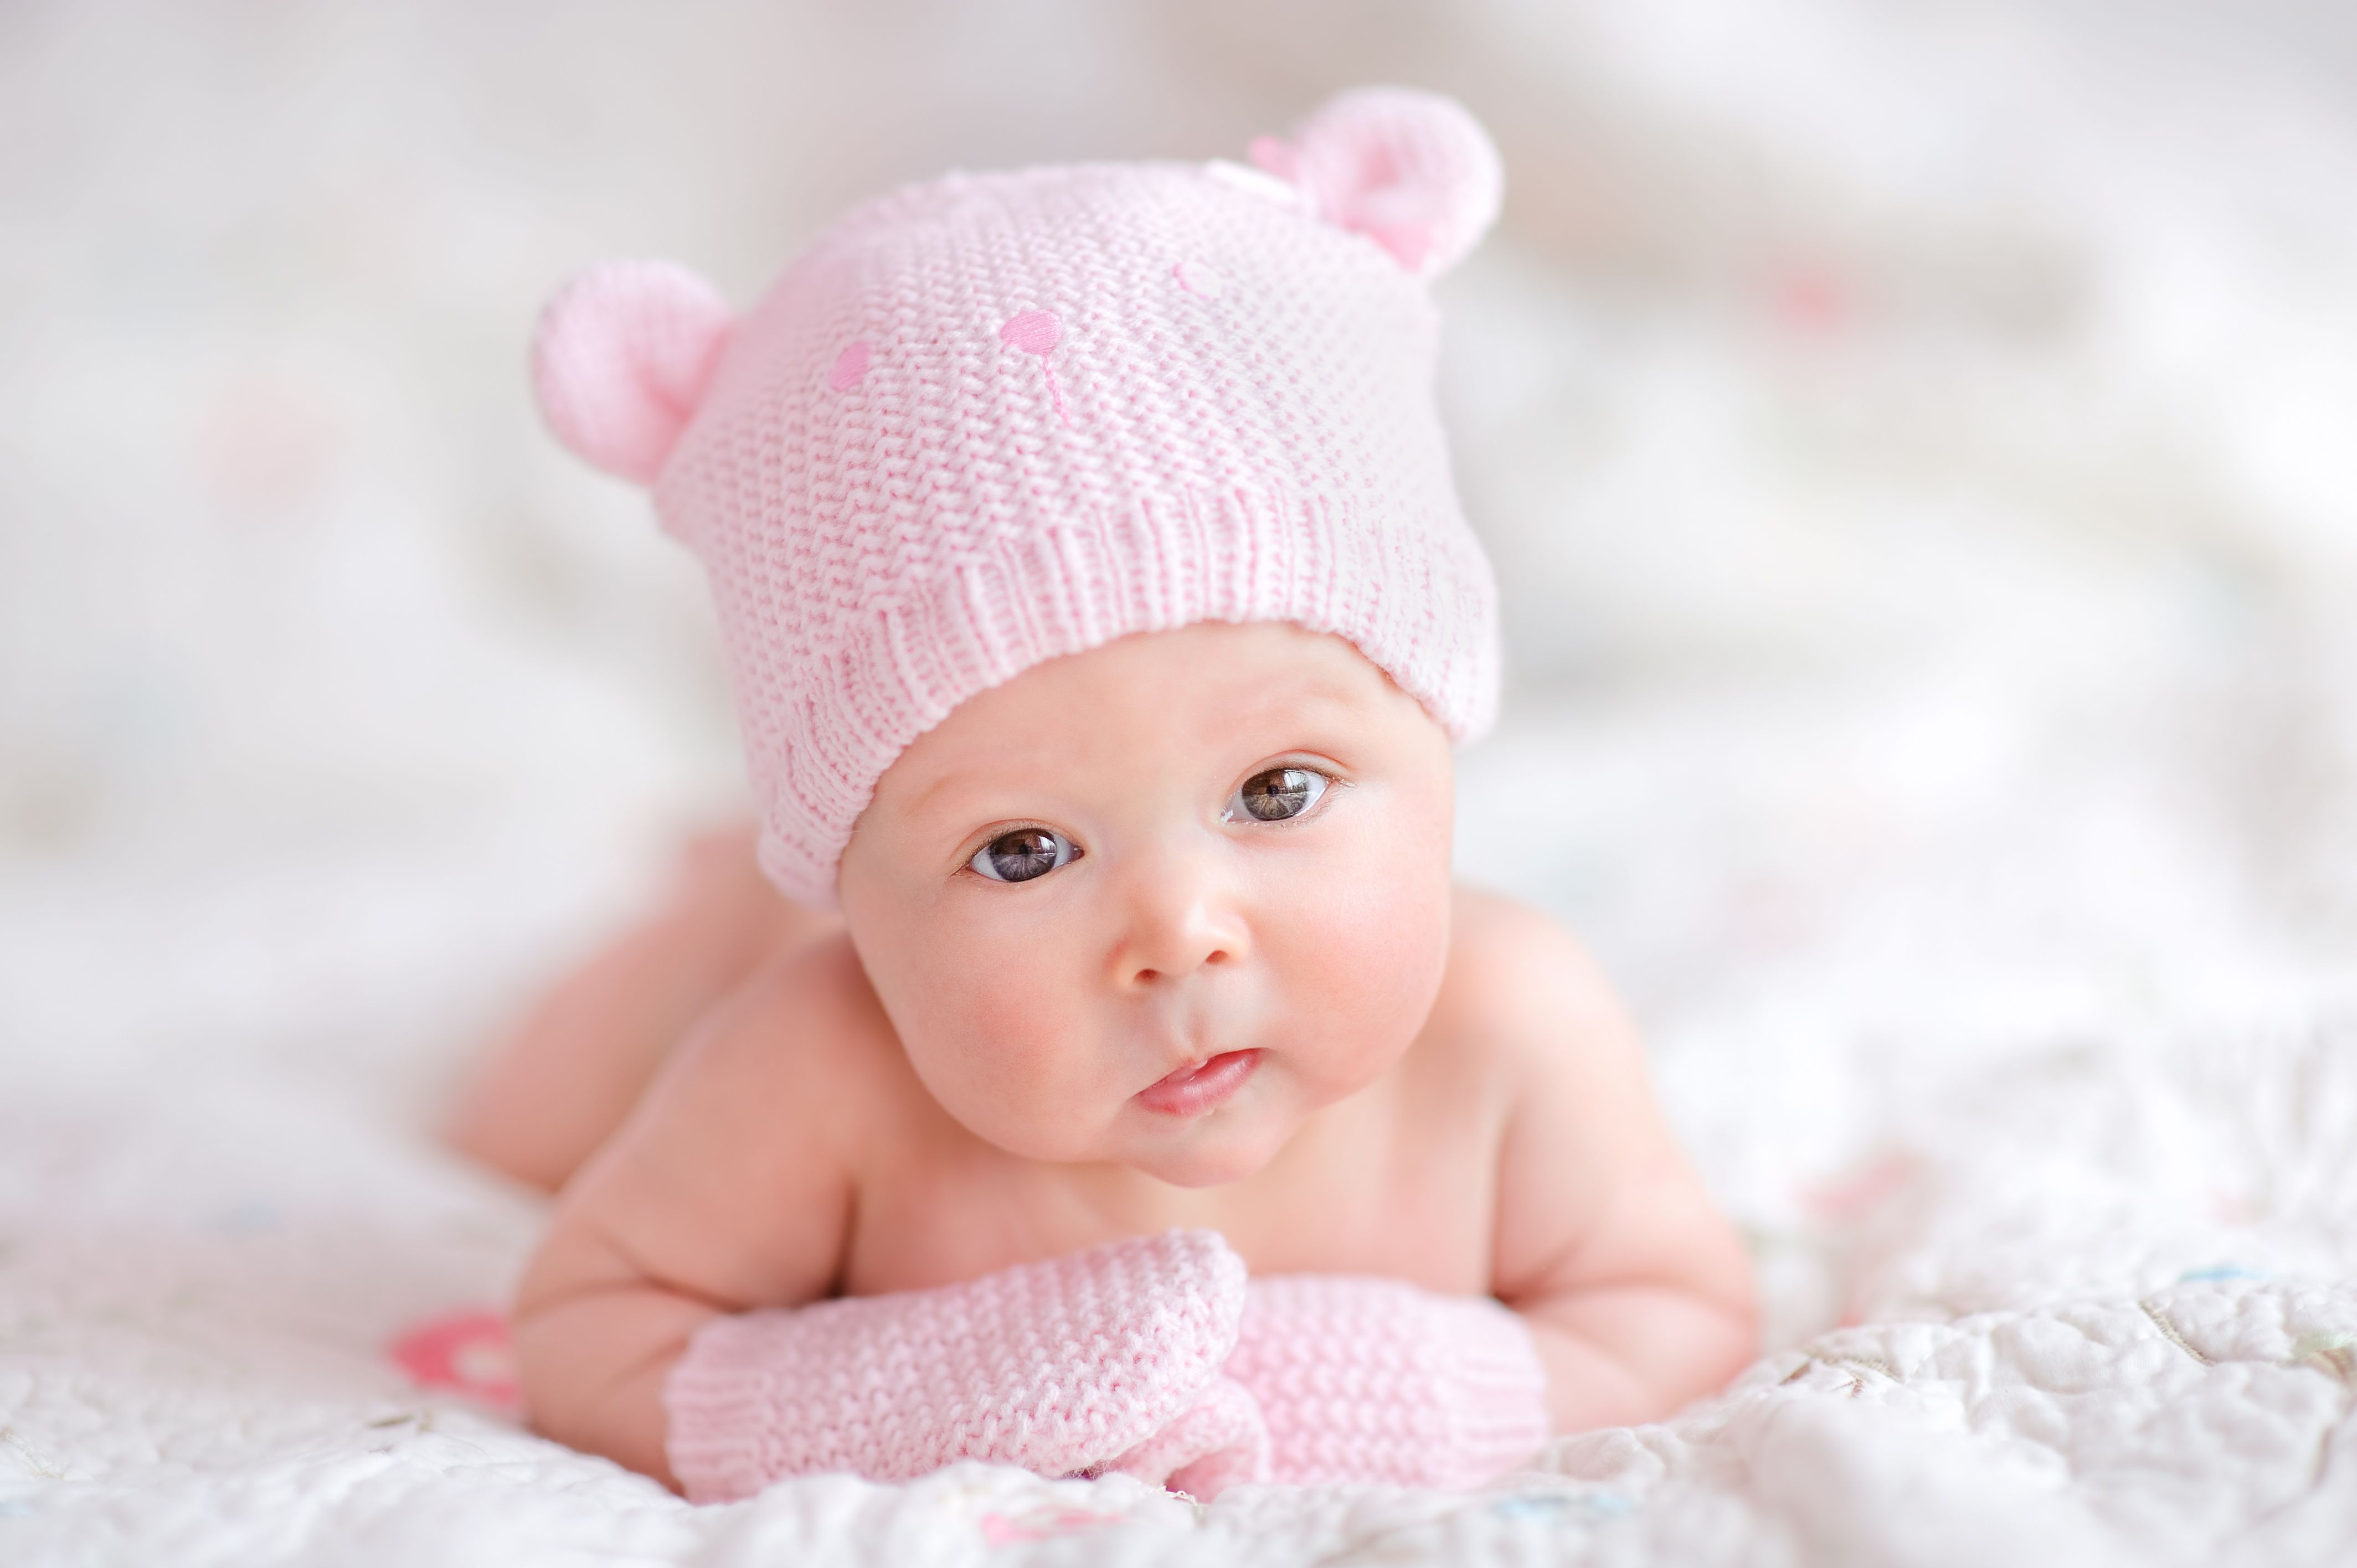 baby girl images and wallpaper Download